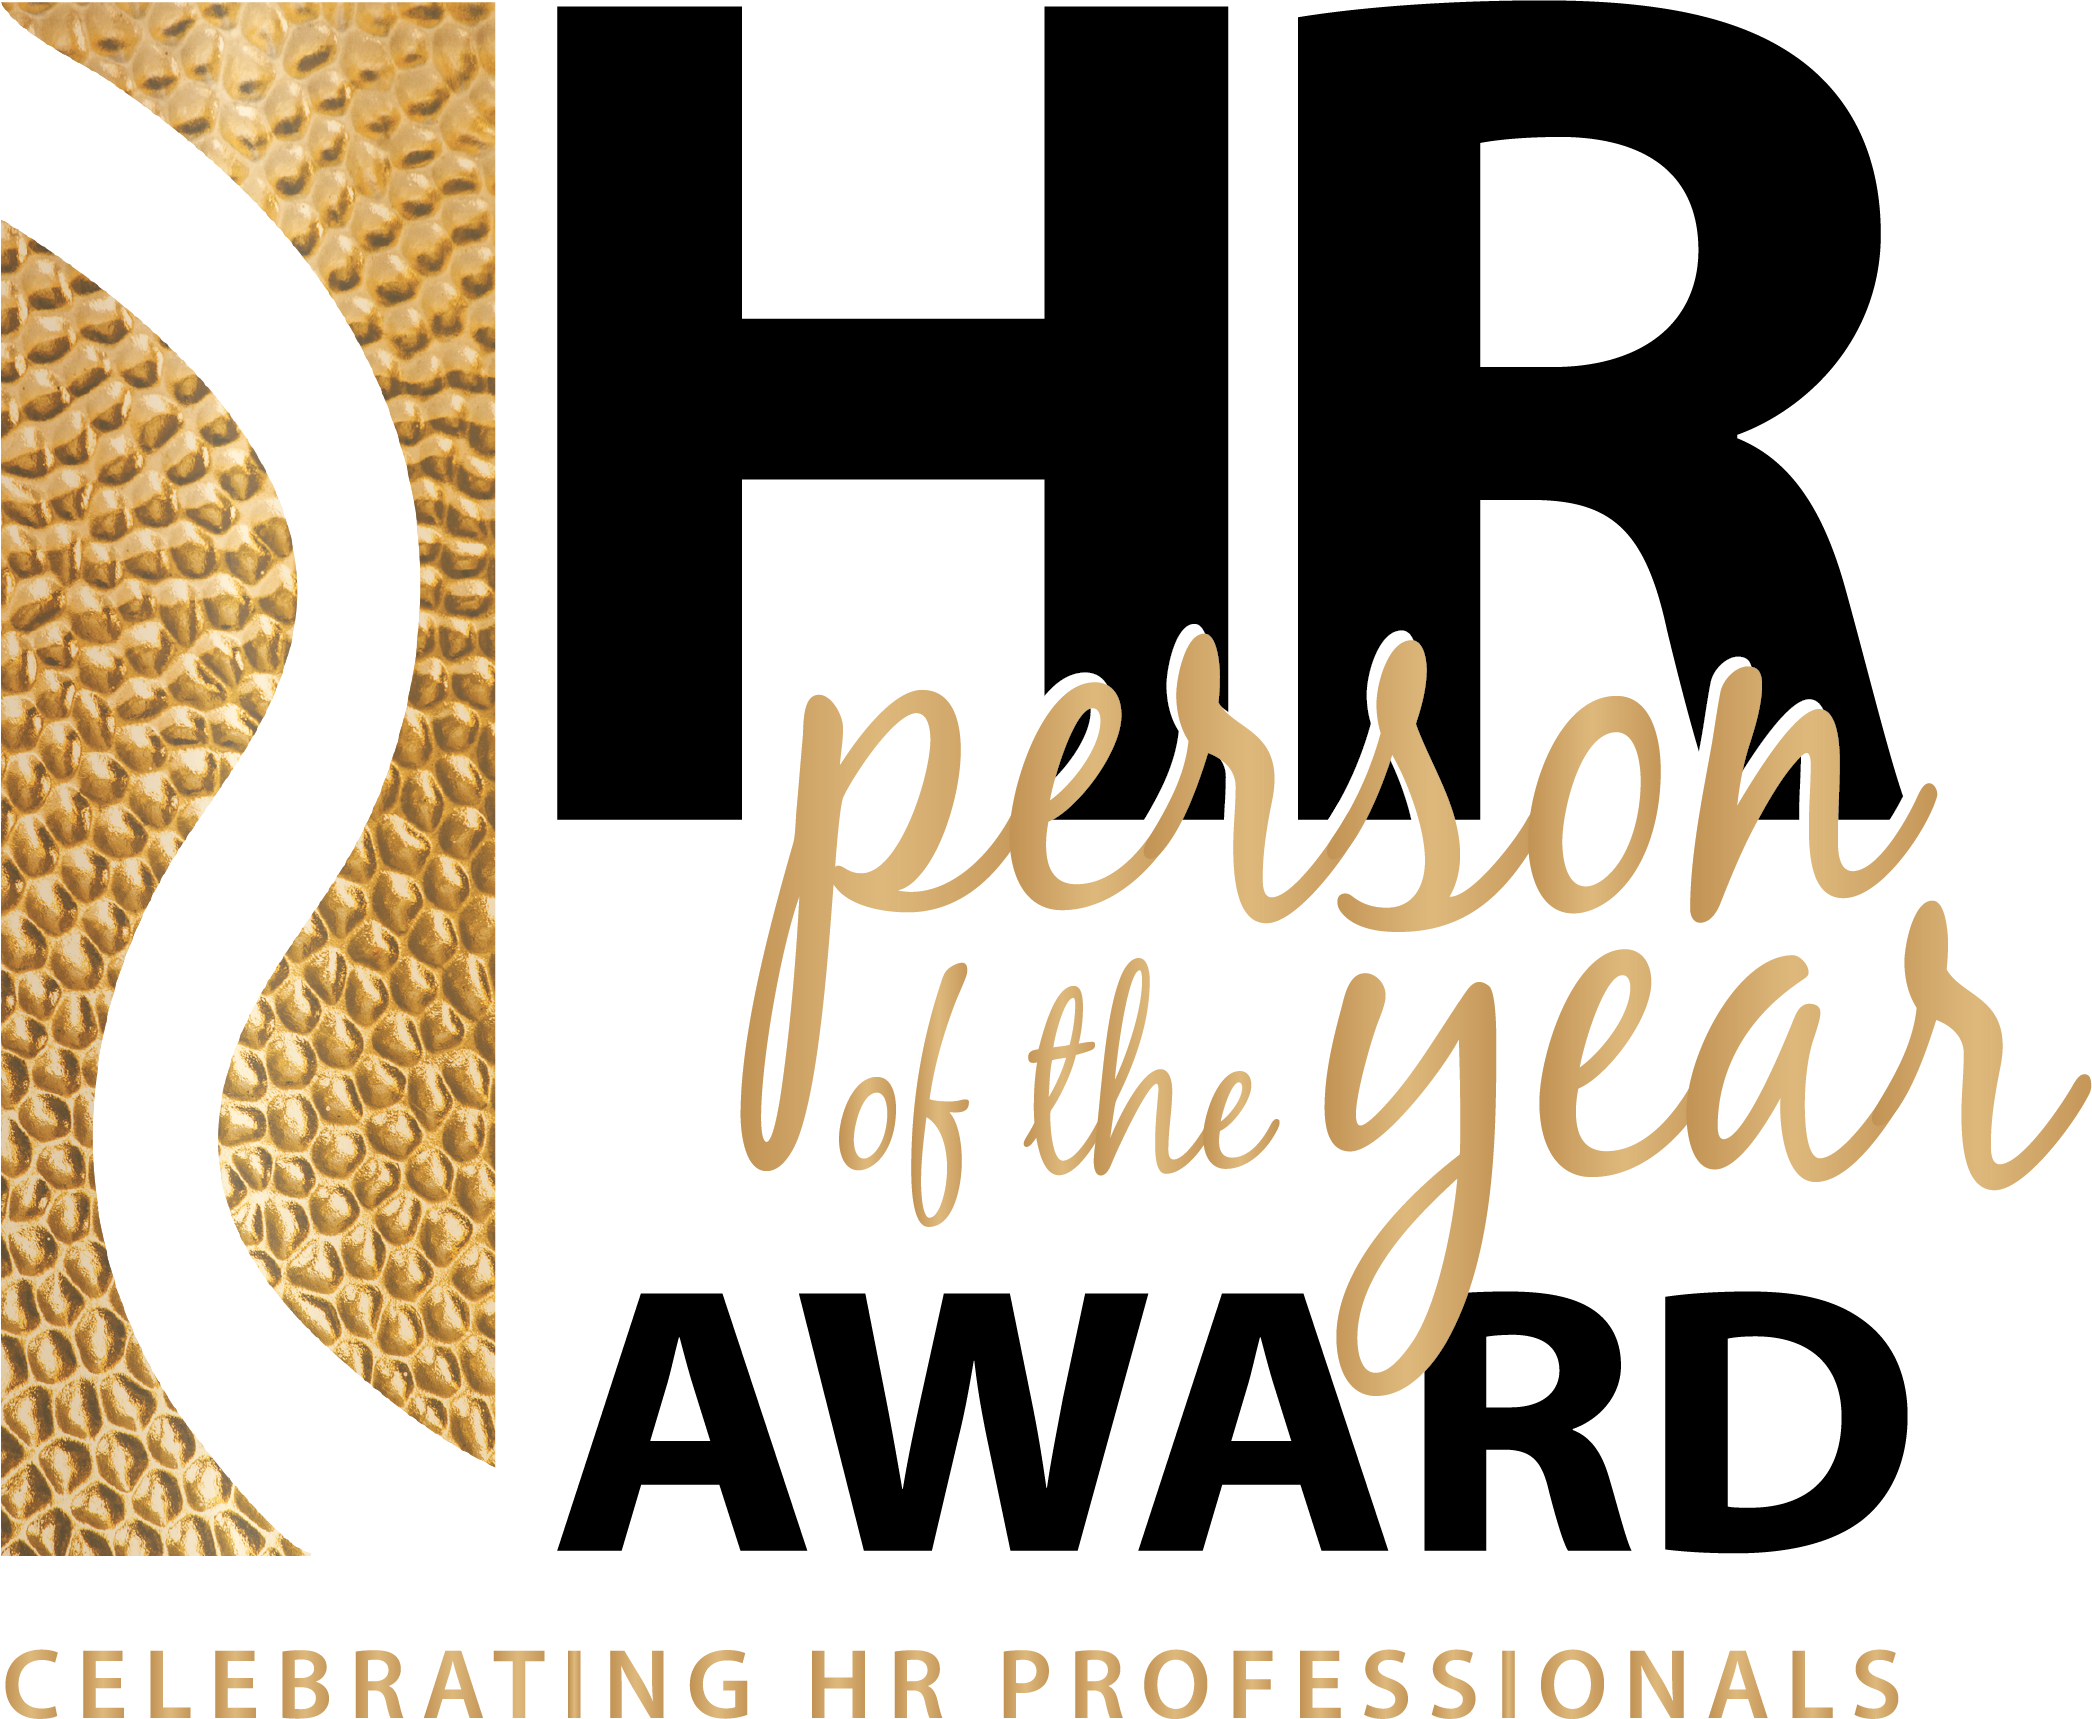 HR Person of the Year Award Logo